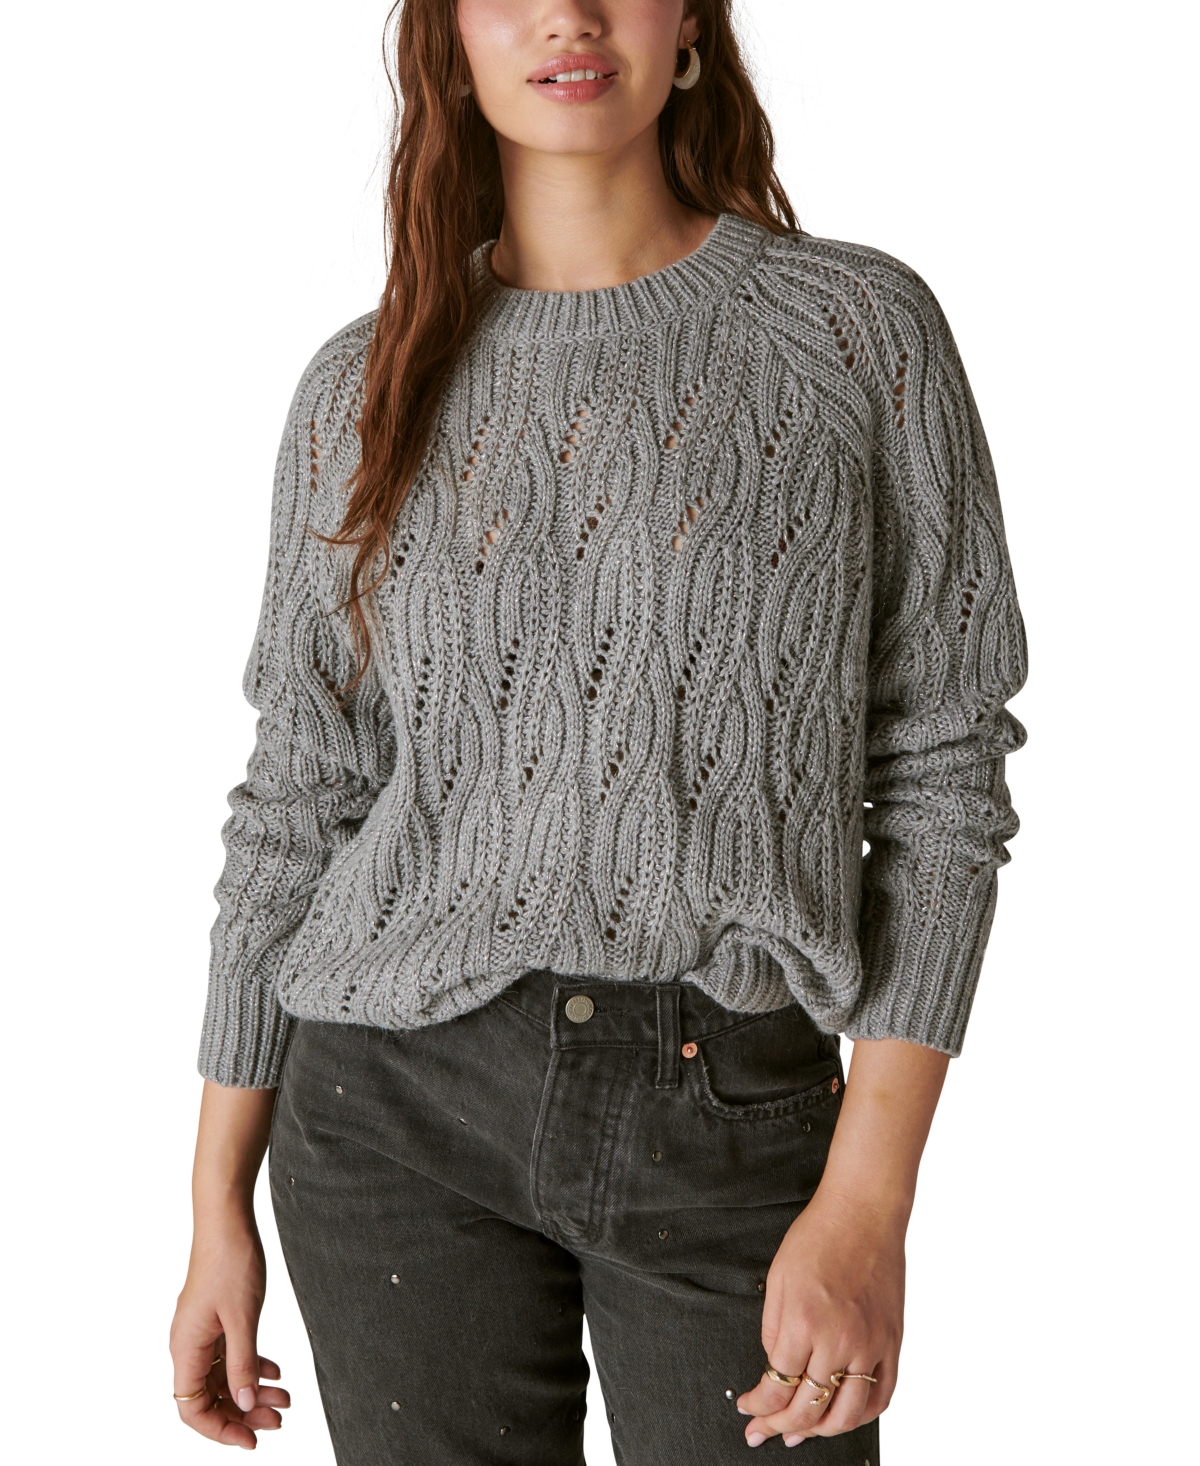 LUCKY BRAND WOMEN'S SHINE CABLE KNIT CREWNECK SWEATER